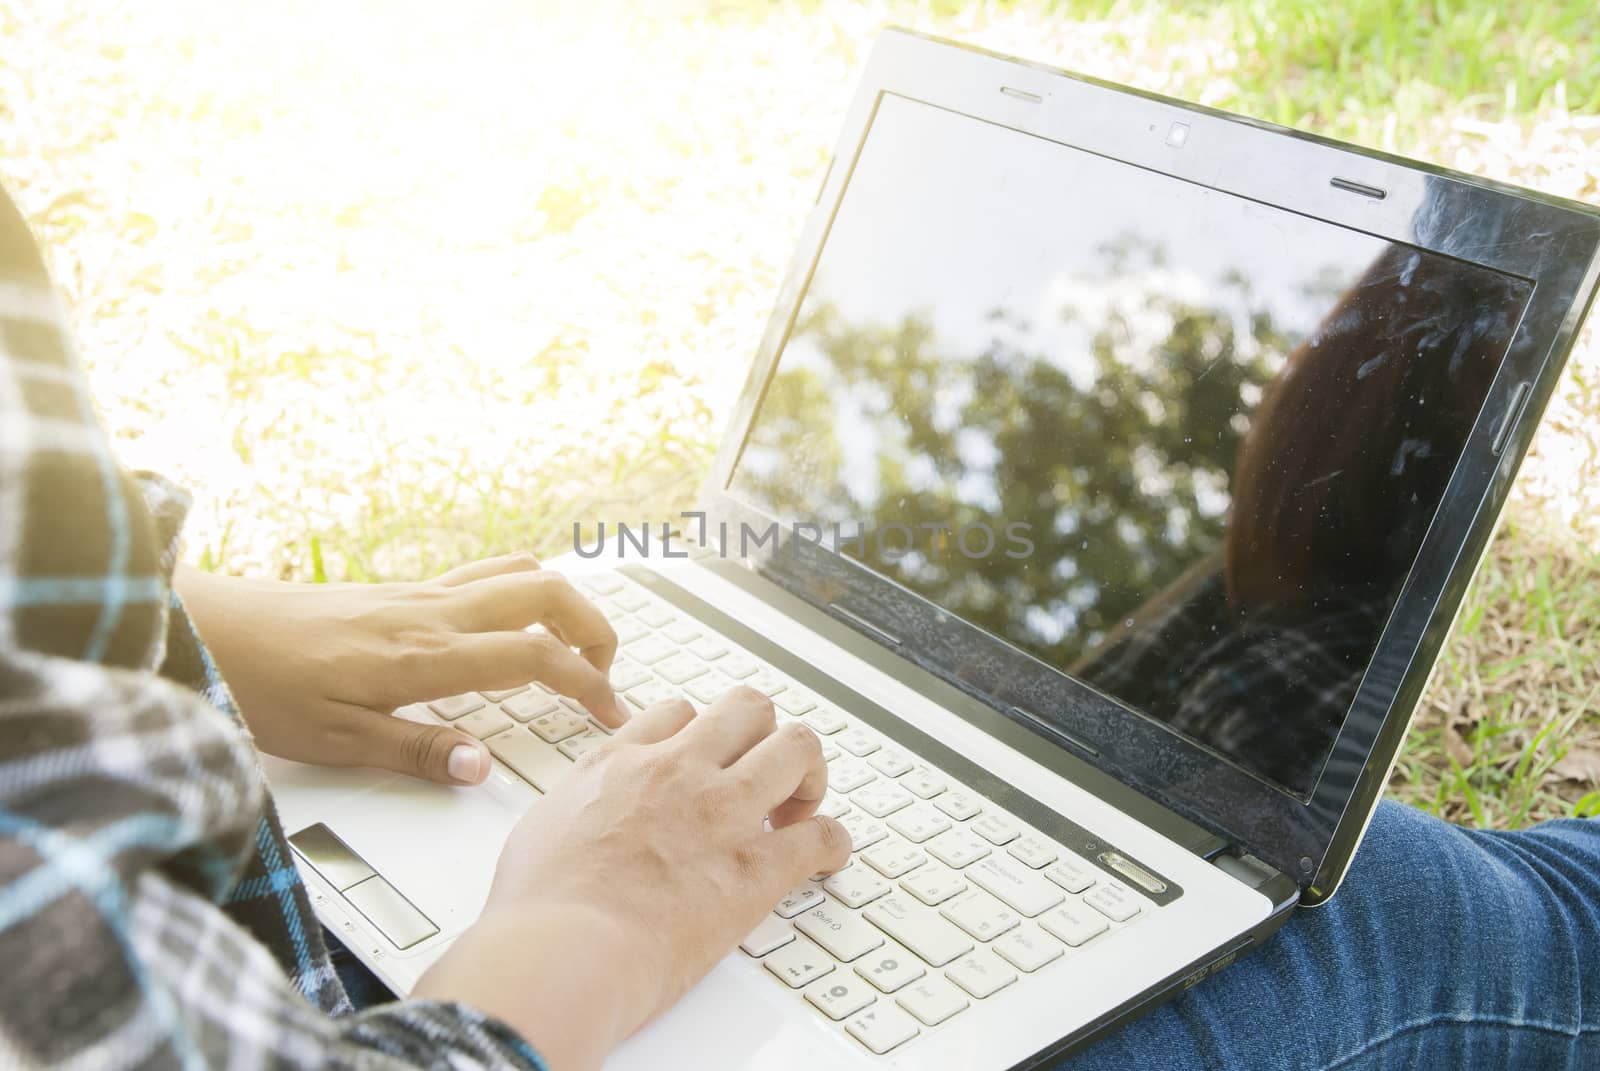 woman using a laptop computer at park with sunlight